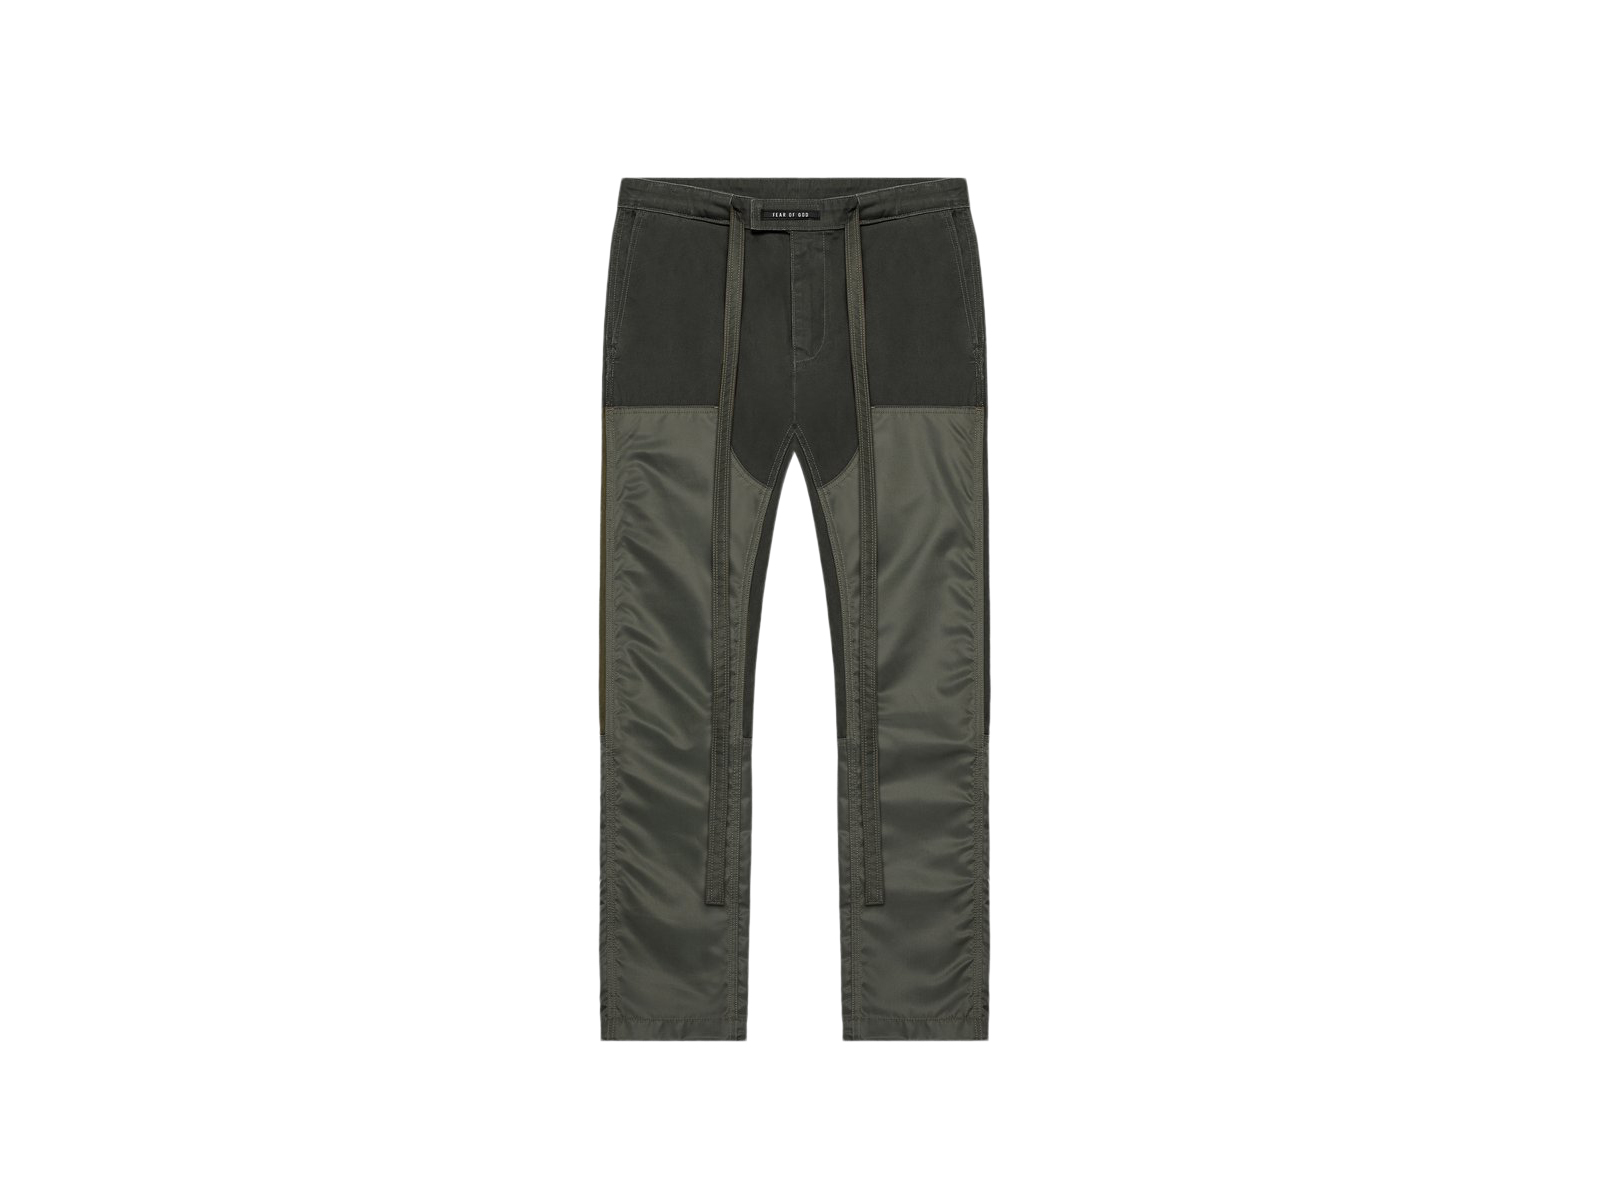 FEAR OF GOD Nylon Canvas Double Front Work Pants Forest Green/Army ...